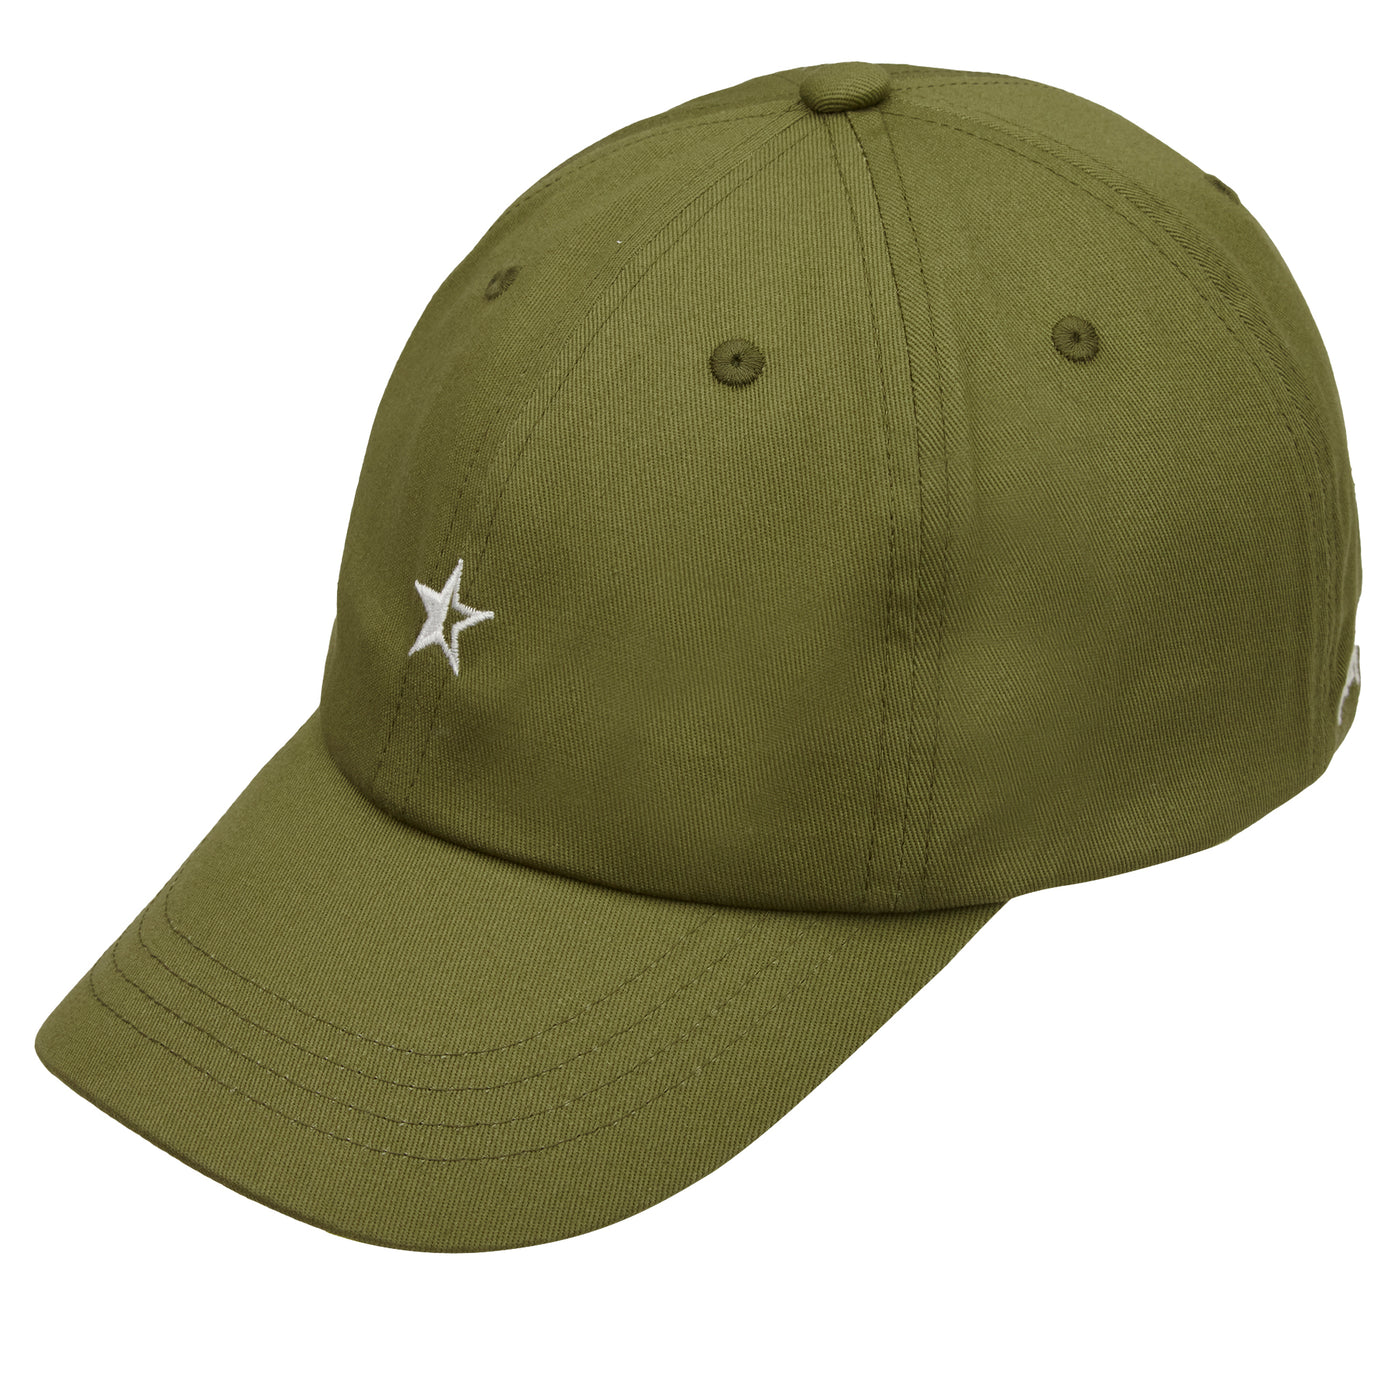 Star Cap - Olive and Off White